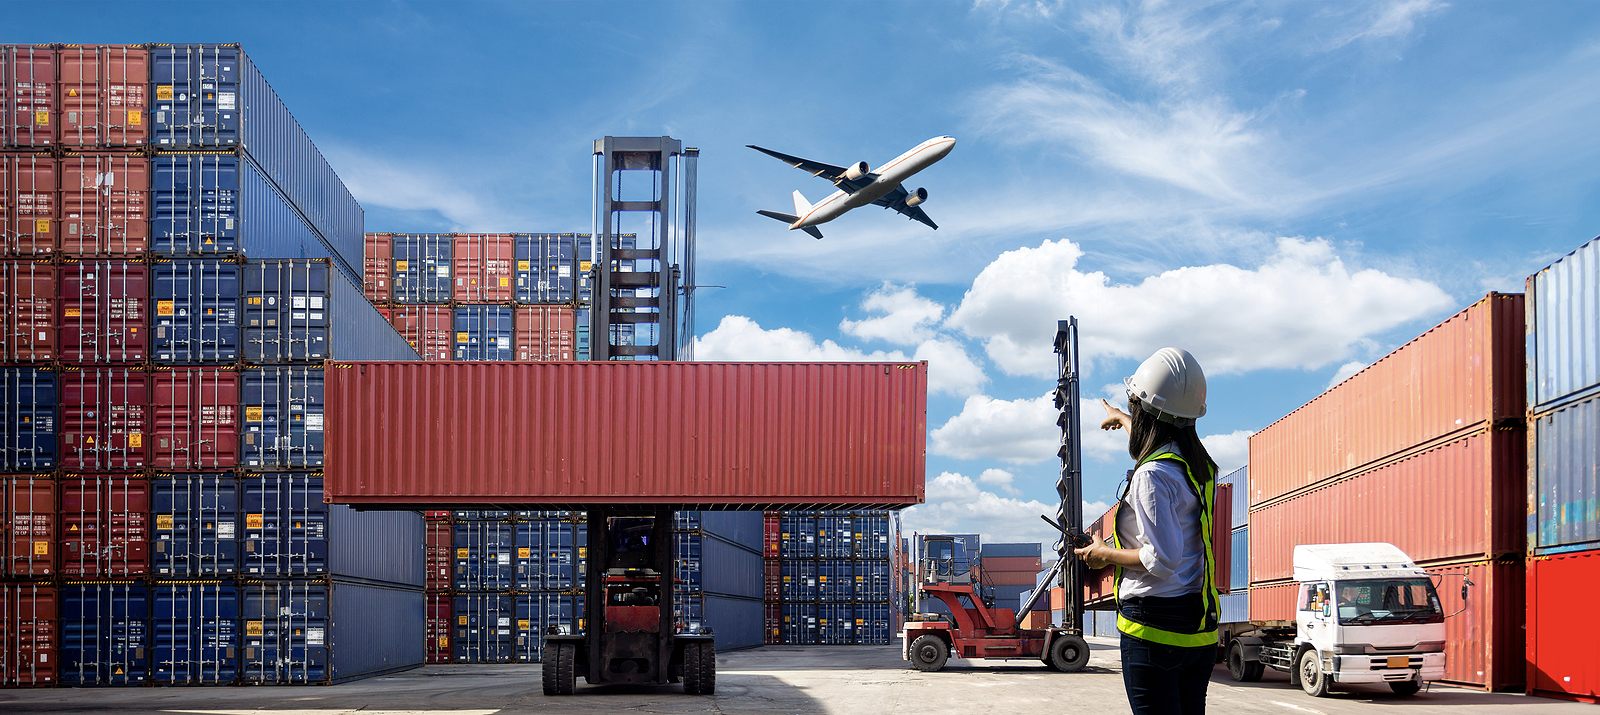 Containers, planes, and trucks are used in logistics.